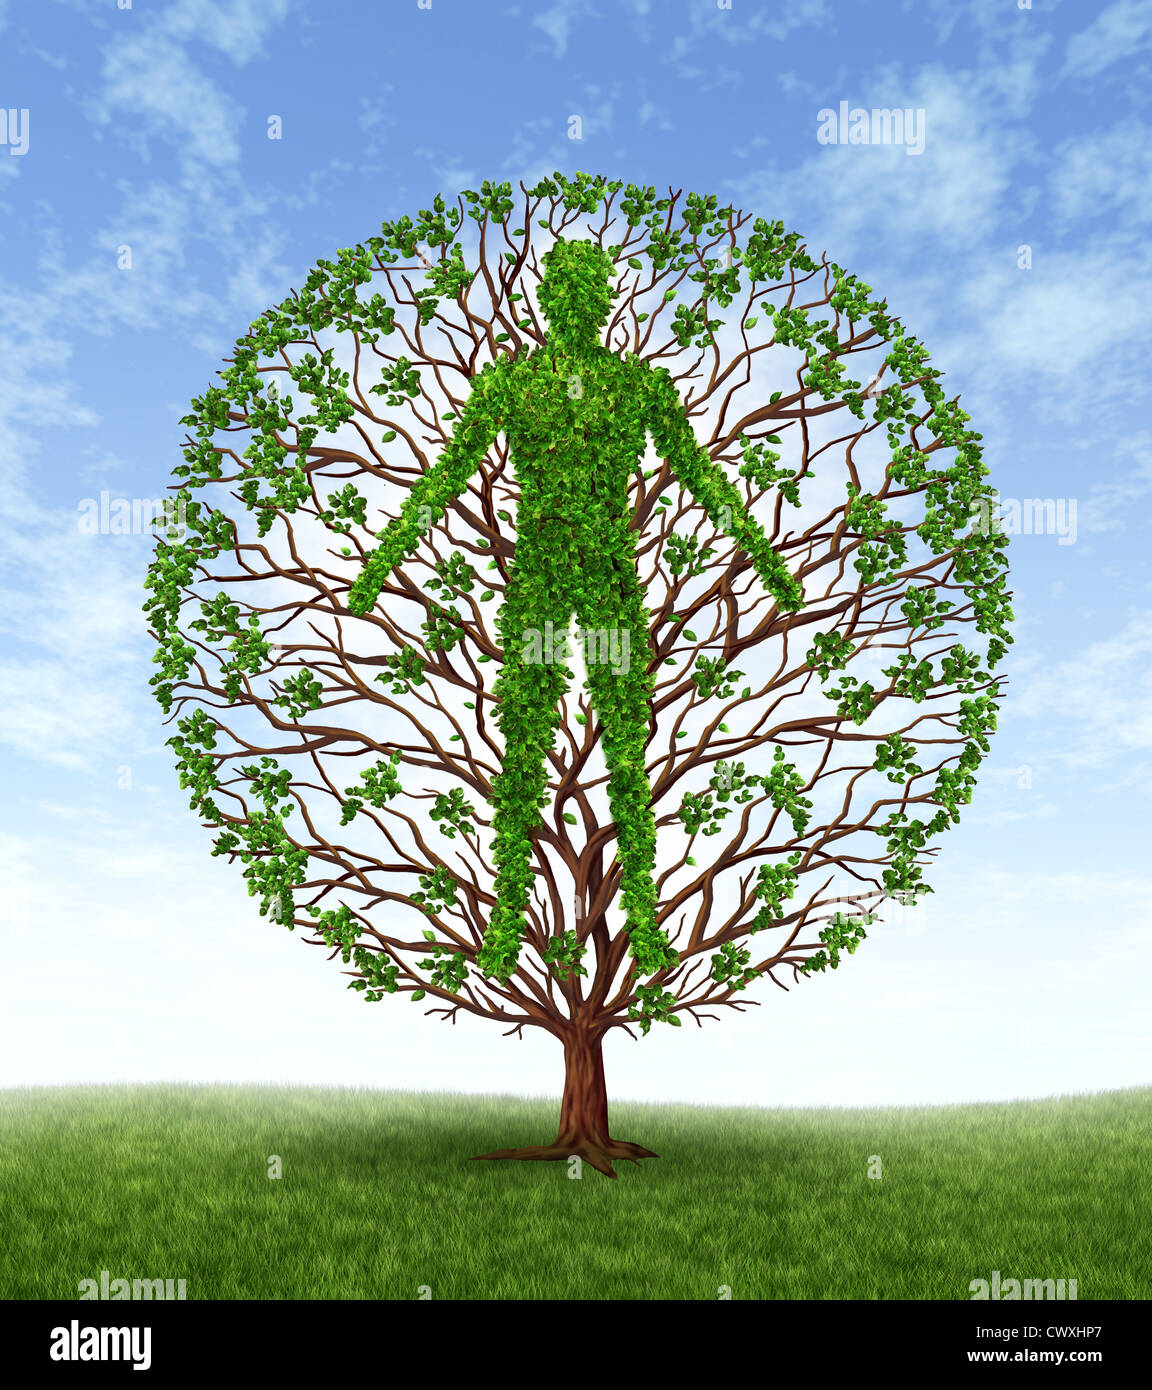 Human growth and development and personality development as a medical symbol of health as a tree with branches and green leaves Stock Photo